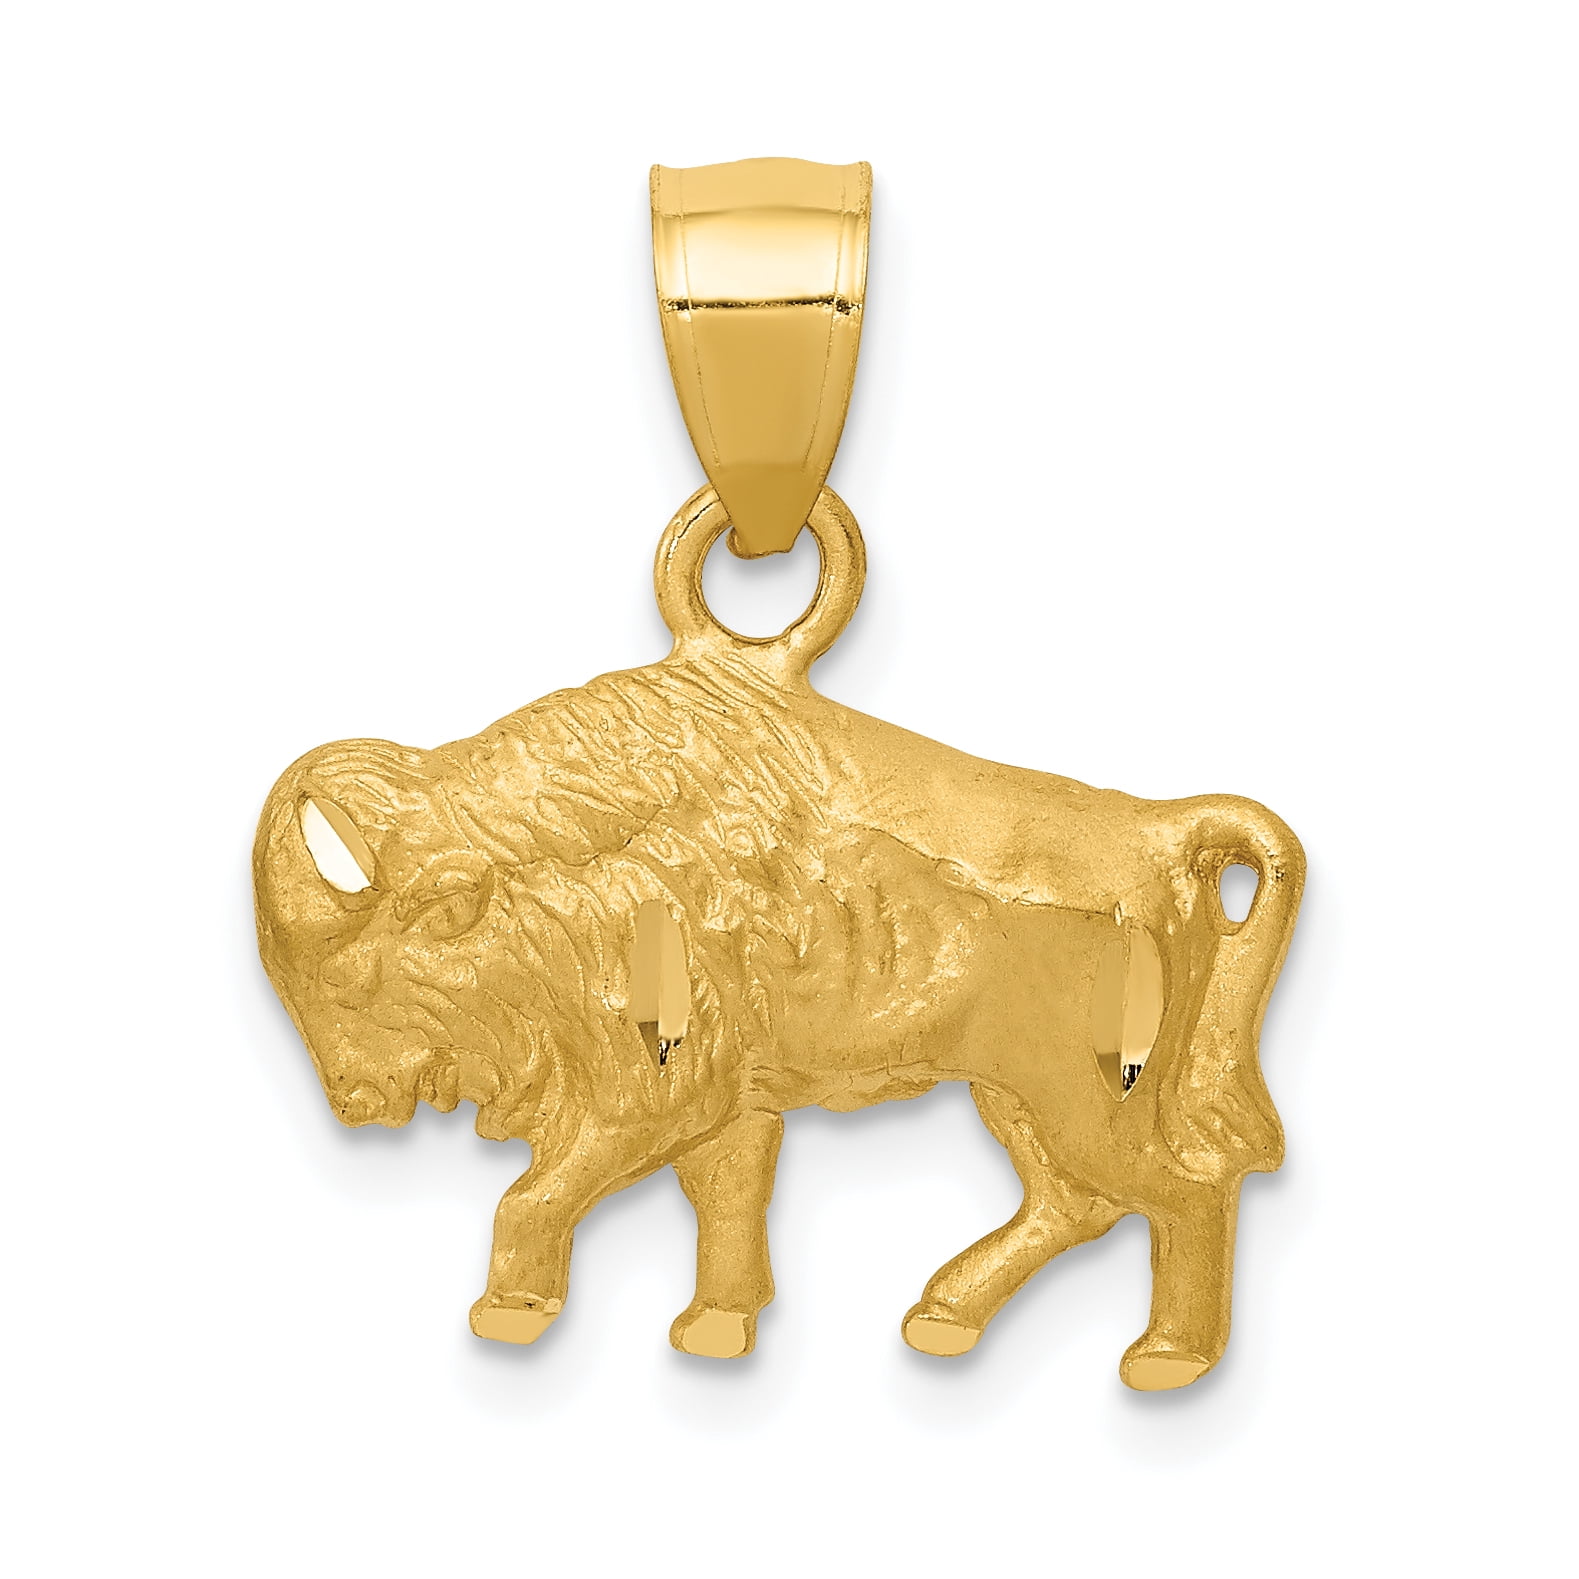 IceCarats - 14kt Gold Buffalo Pendant Charm Necklace Animal Wild Fine Jewelry Ideal Gifts For Women Gift Set From Heart - Walmart.com - Walmart.com